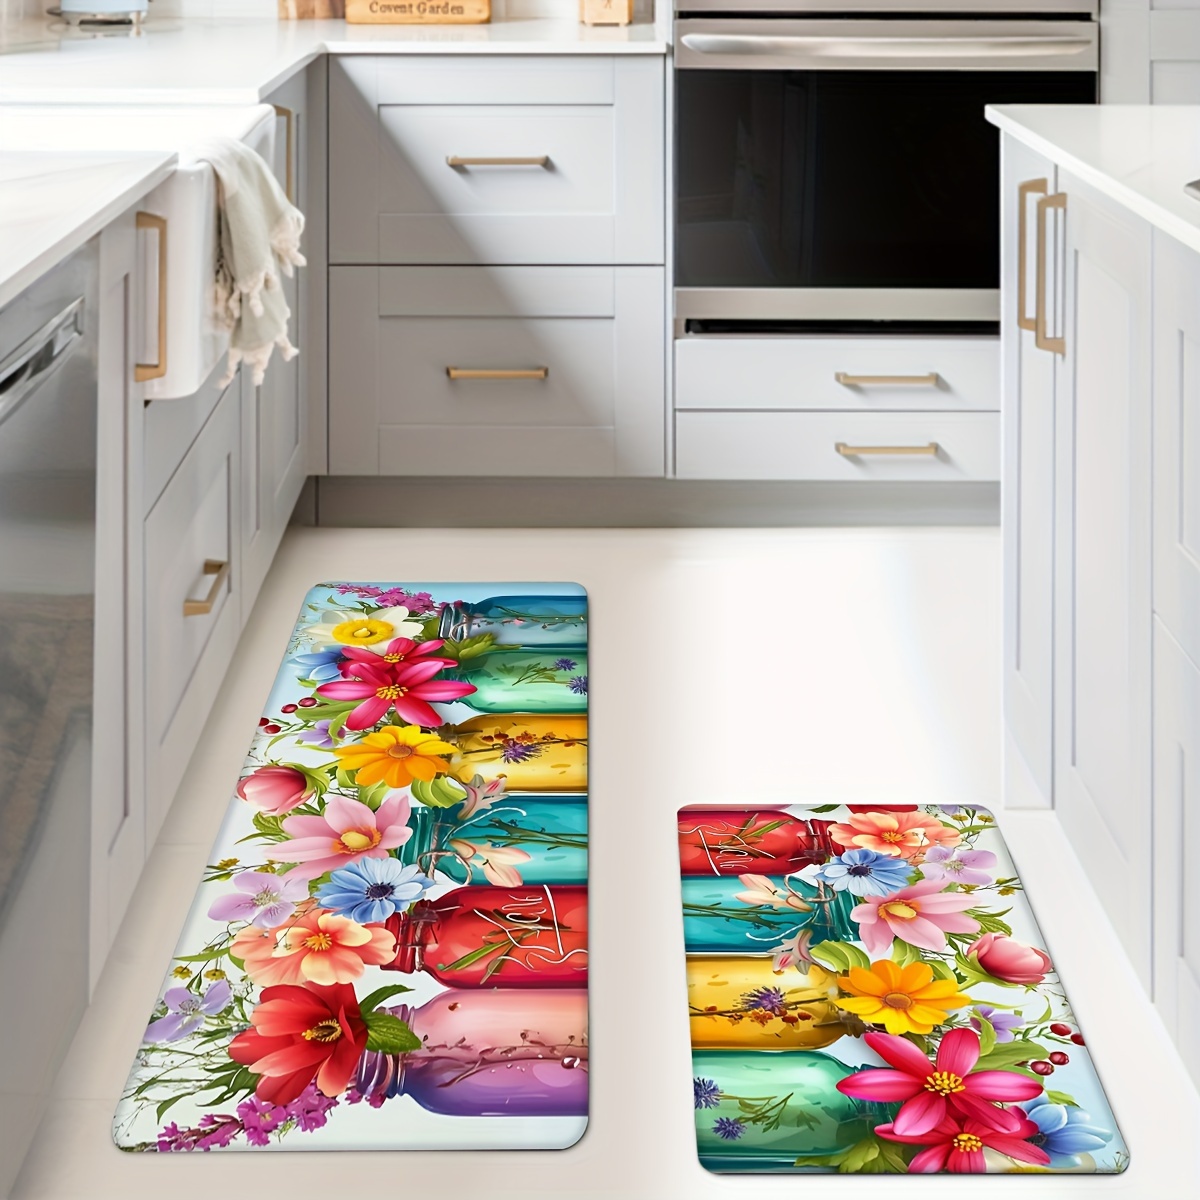 

1pc/2pcs, Spring Flowers Kitchen Mats, Non-slip And Durable Bathroom Pads For Floor, Comfortable Standing Runner Rugs, Carpets For Kitchen, Home, Office, Laundry Room, Bathroom, Spring Decor